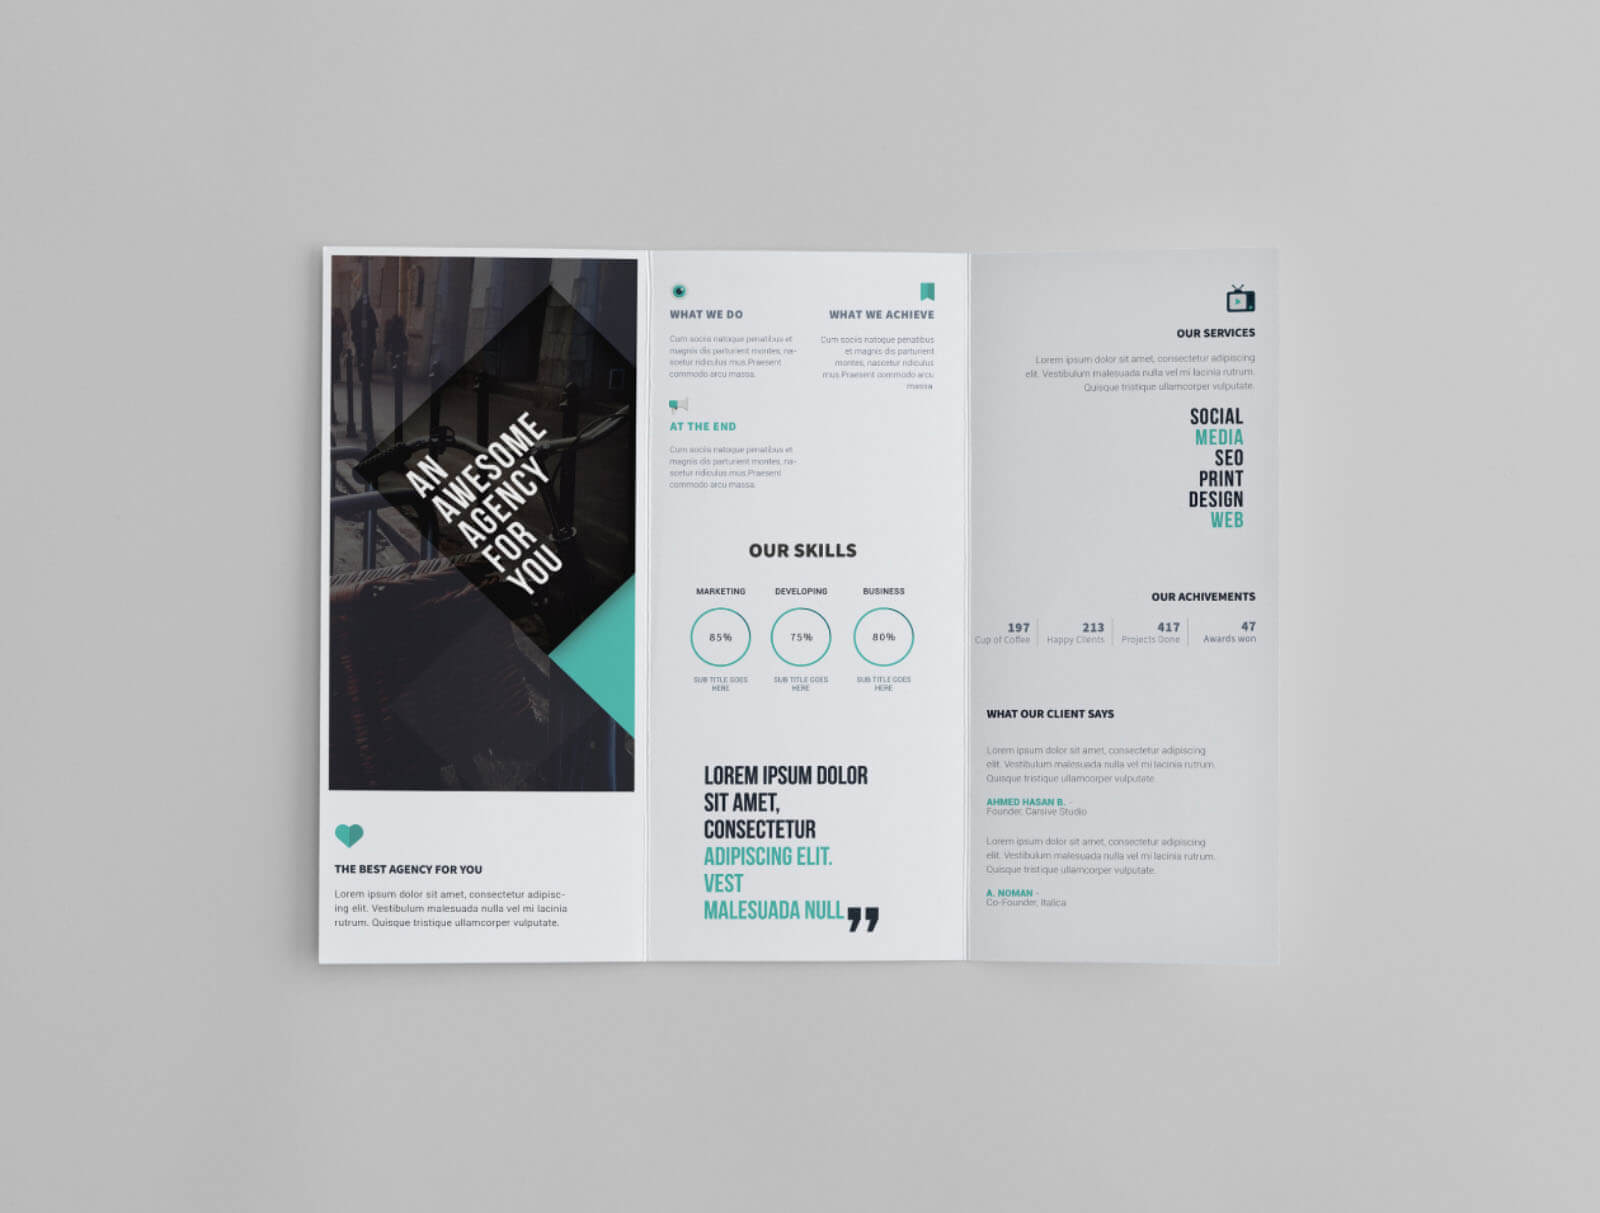 Free Trifold Brochure Template For Free Online Tri Fold Brochure Template